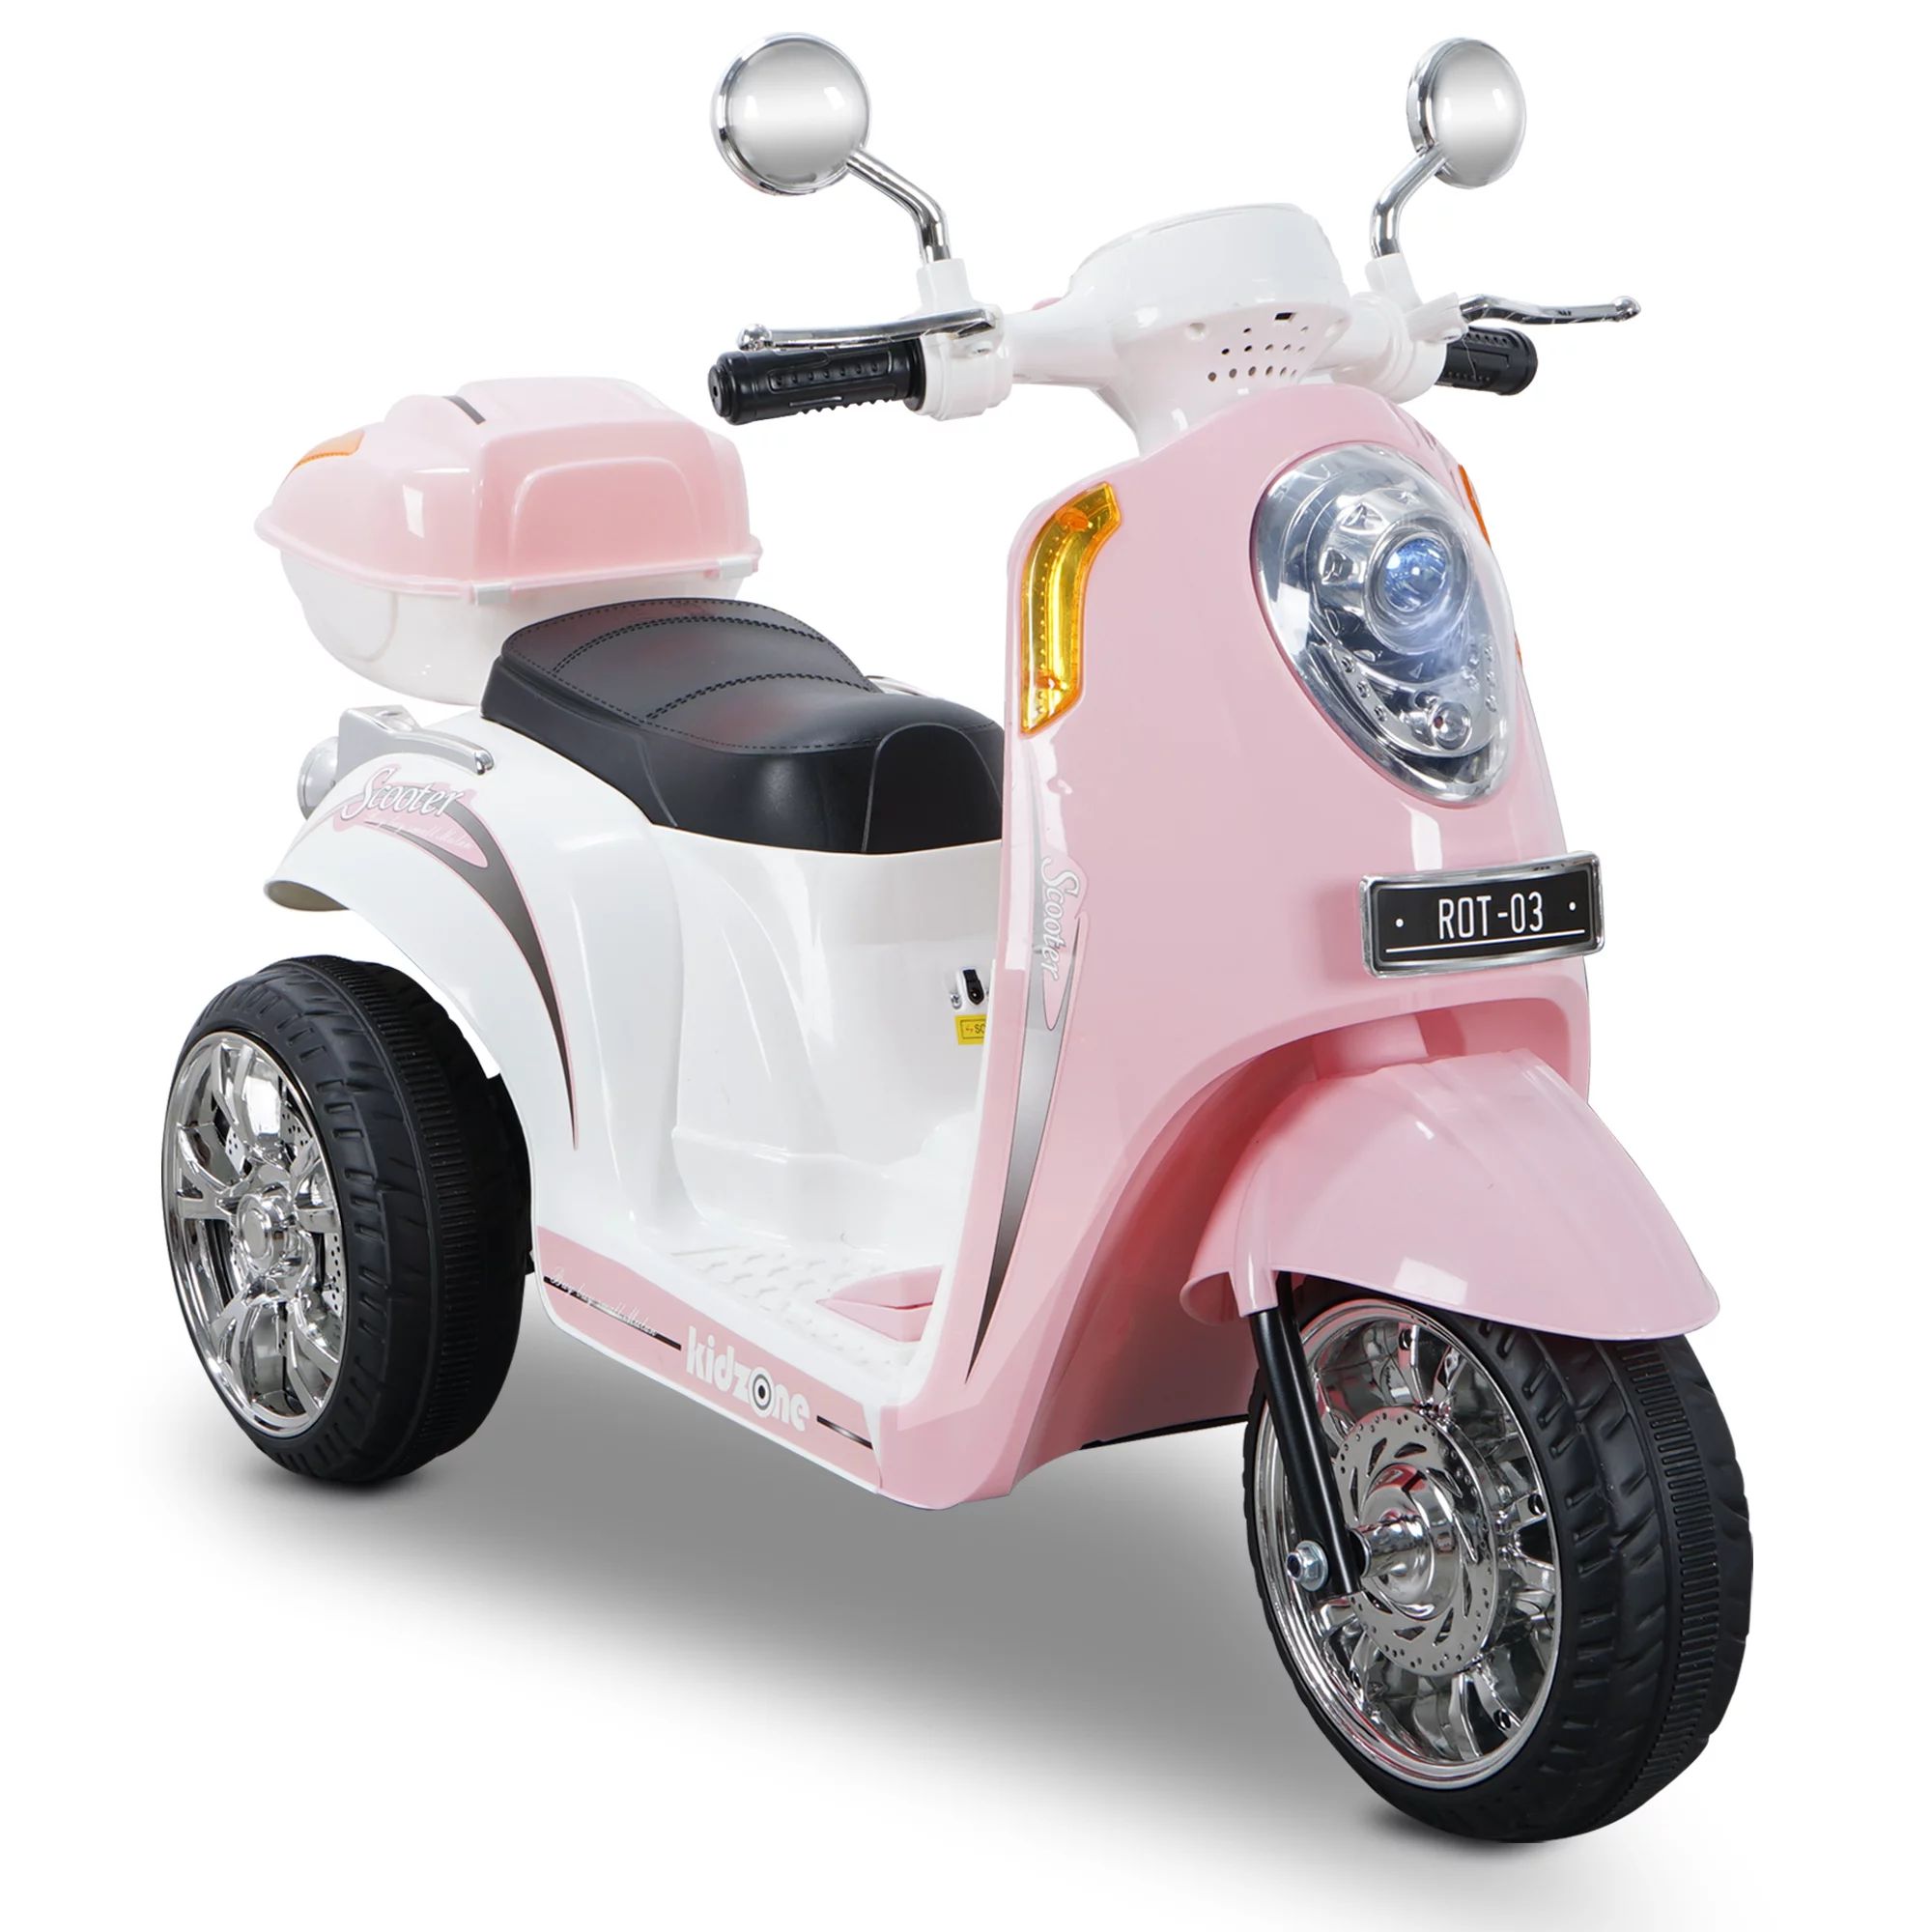 Kidzone Ride On Motorcycle 6V Toy Battery Powered Electric 3 Wheel Power Bicycle With Music, Horn... | Walmart (US)